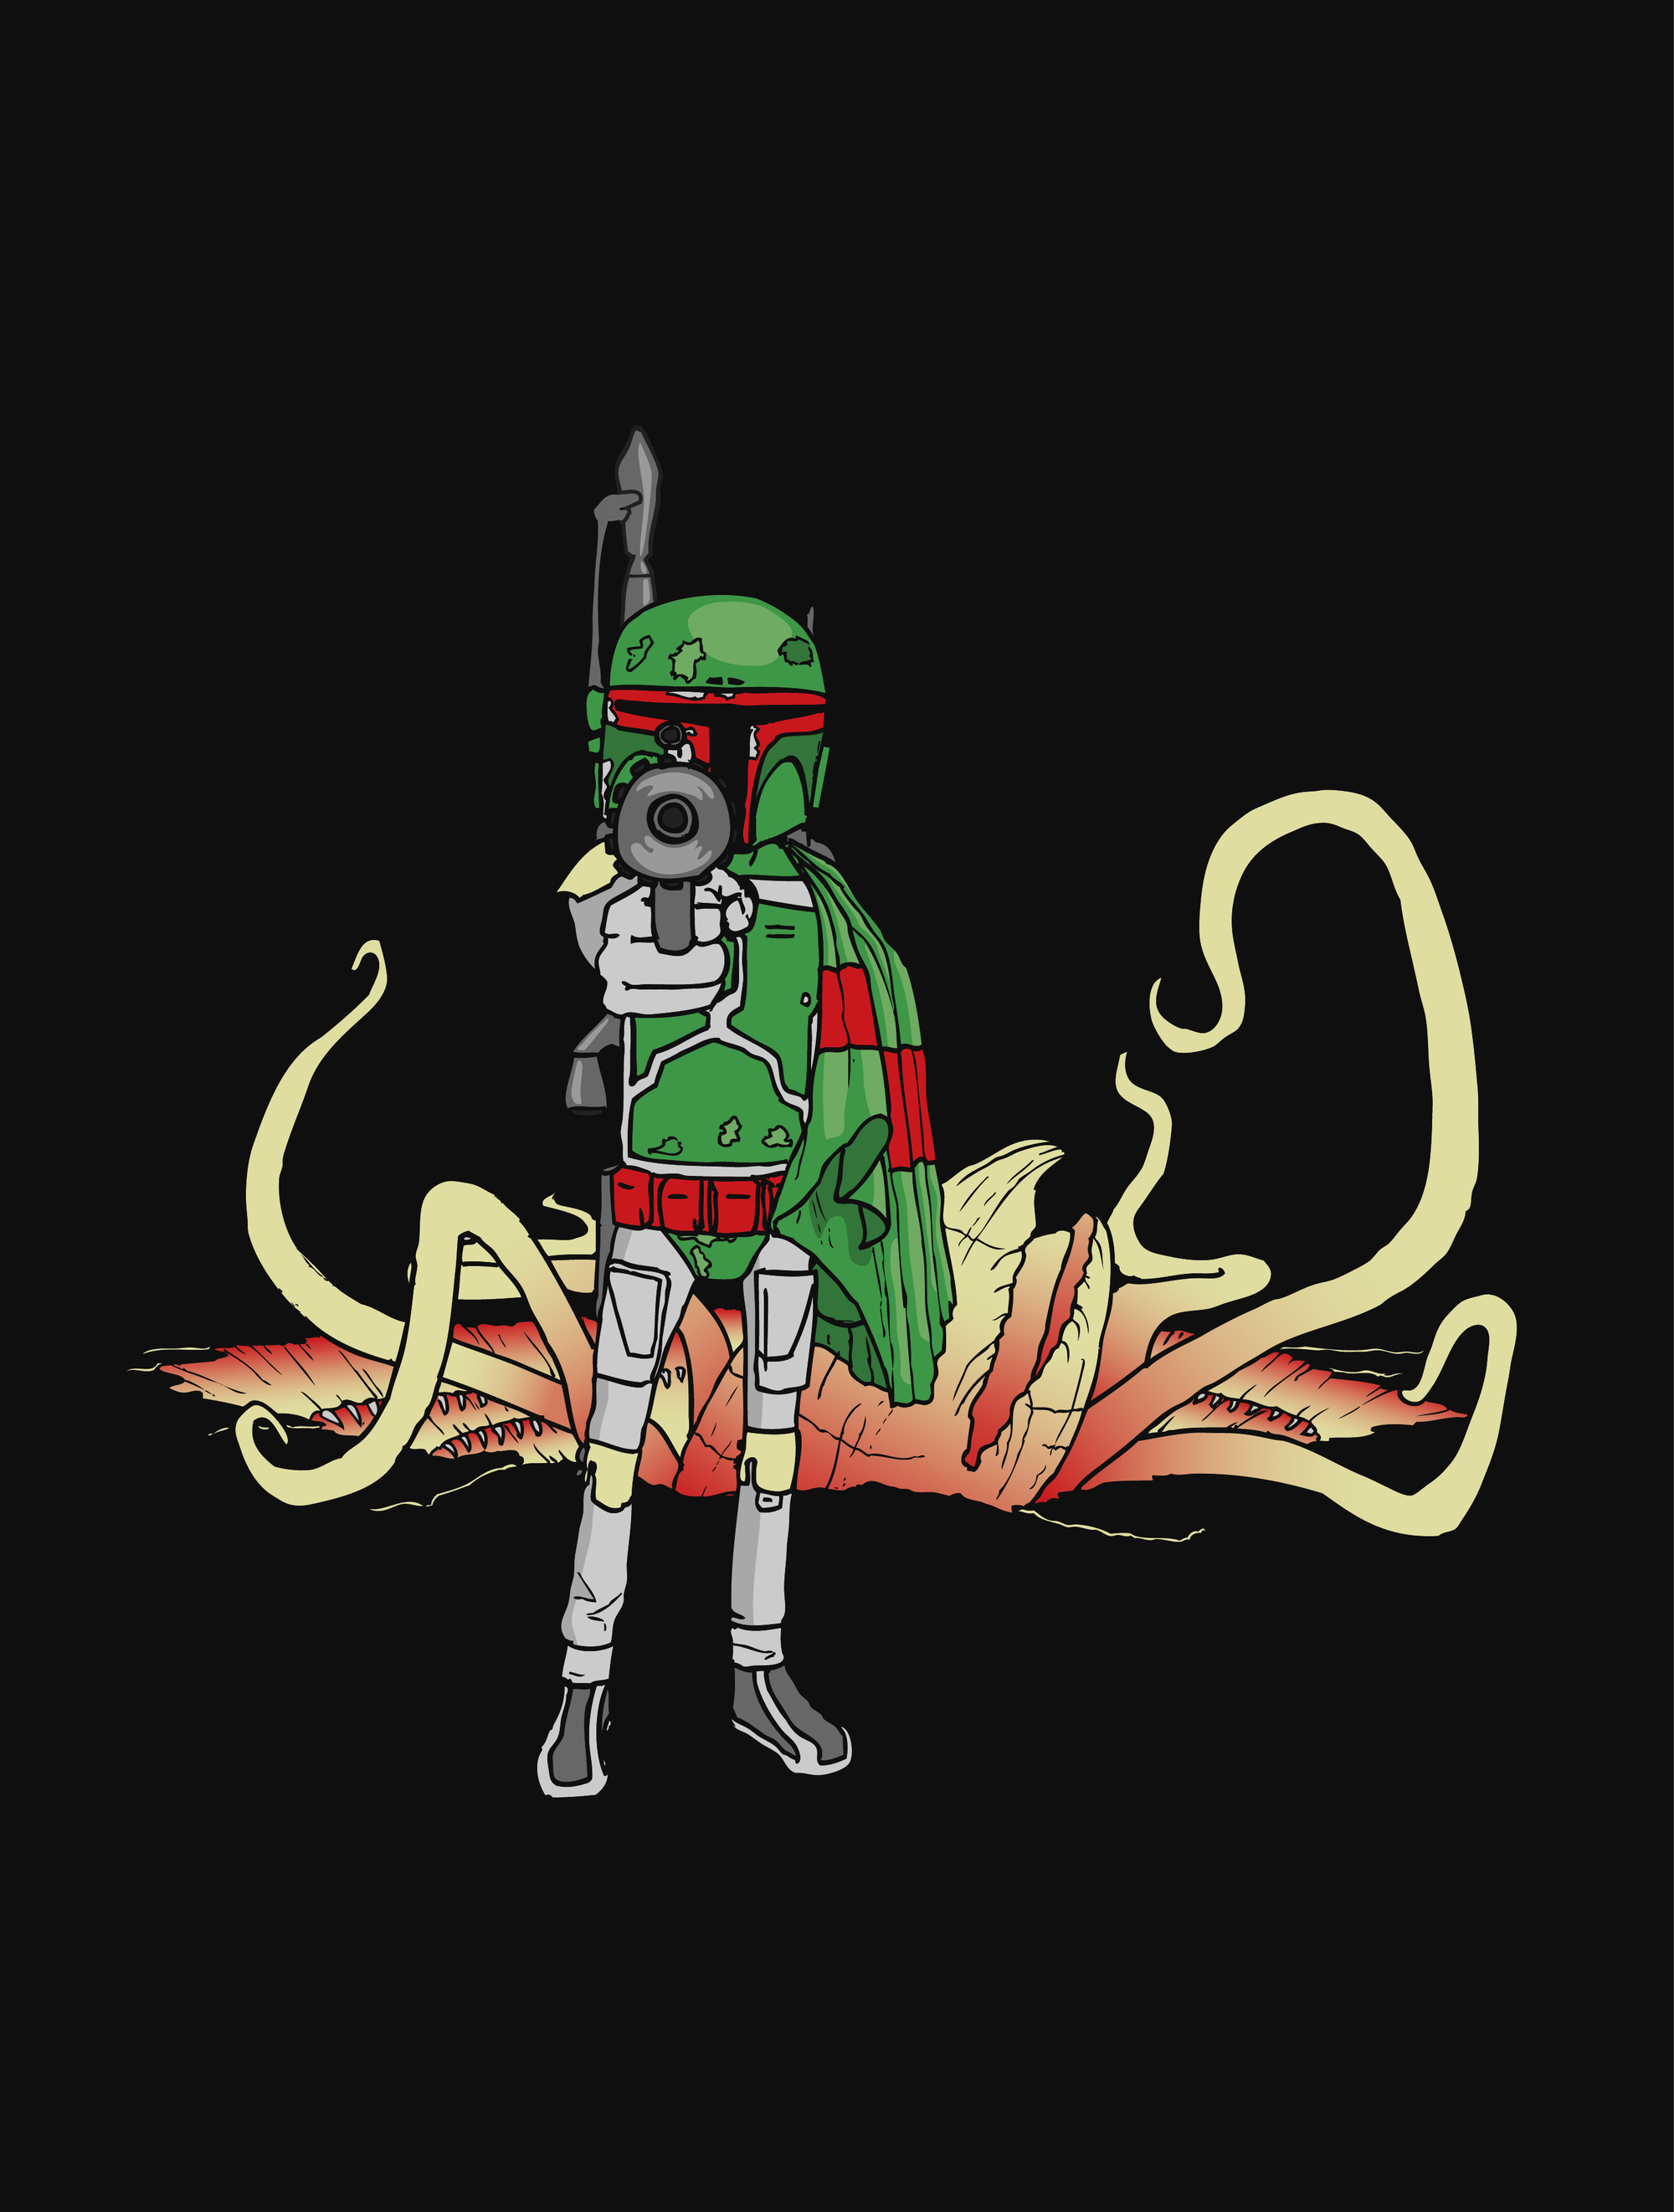 Boba Fett with blaster stands in front of Pit of Carkoon, printed with red and green garb with grey armor. Sarlacc head and tentacles visible, printed in yellow to orange gradient. On black background.